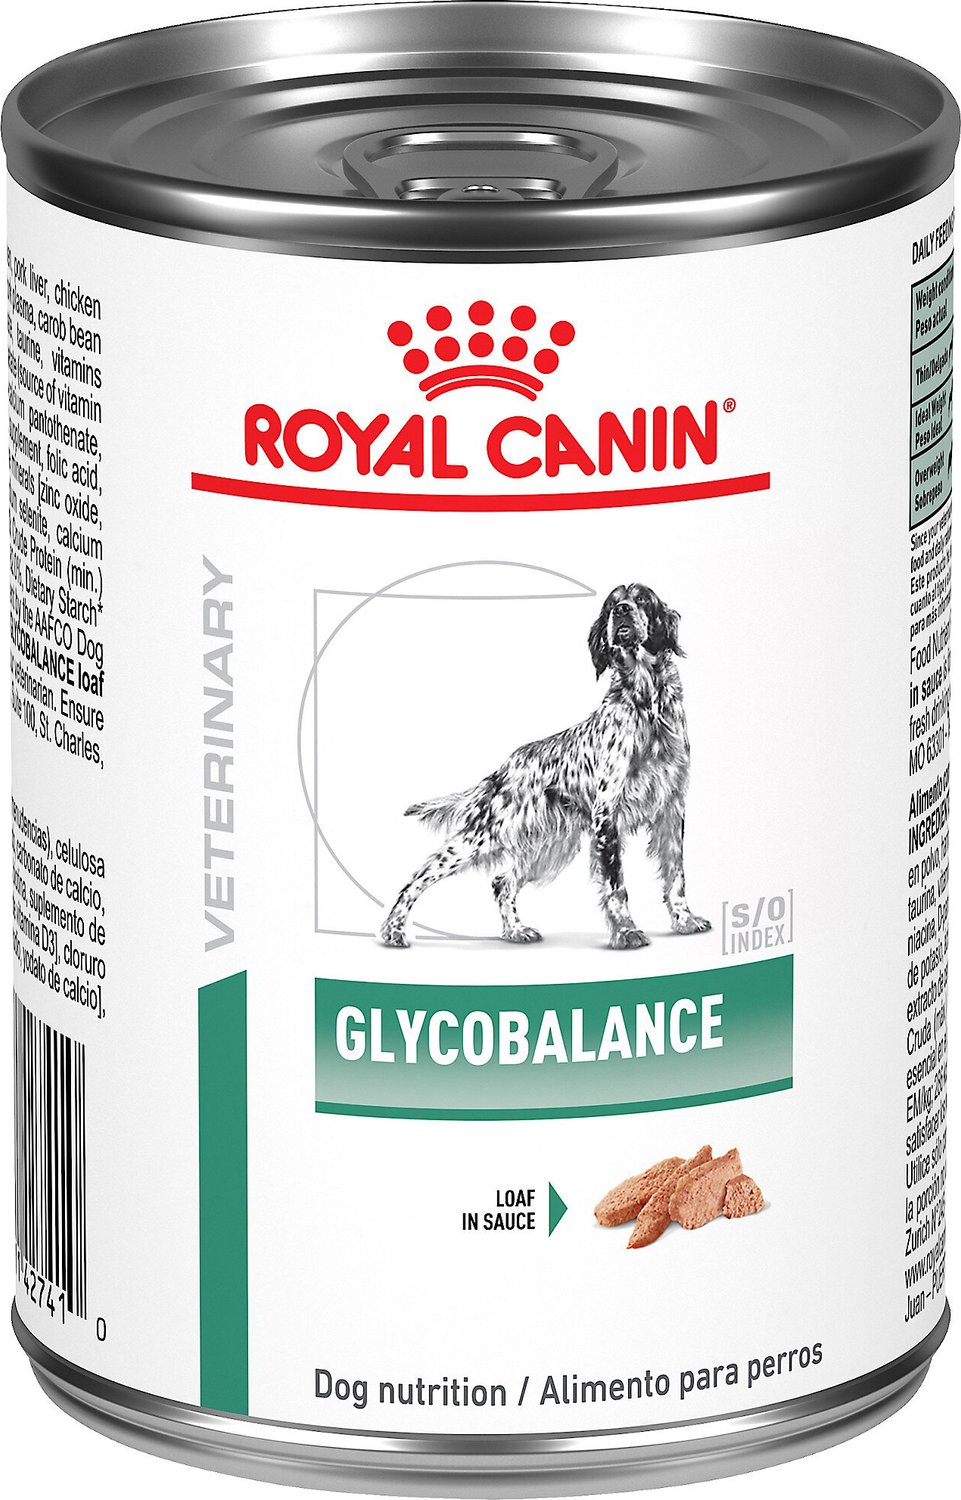 royal canin hypoallergenic dog food wet